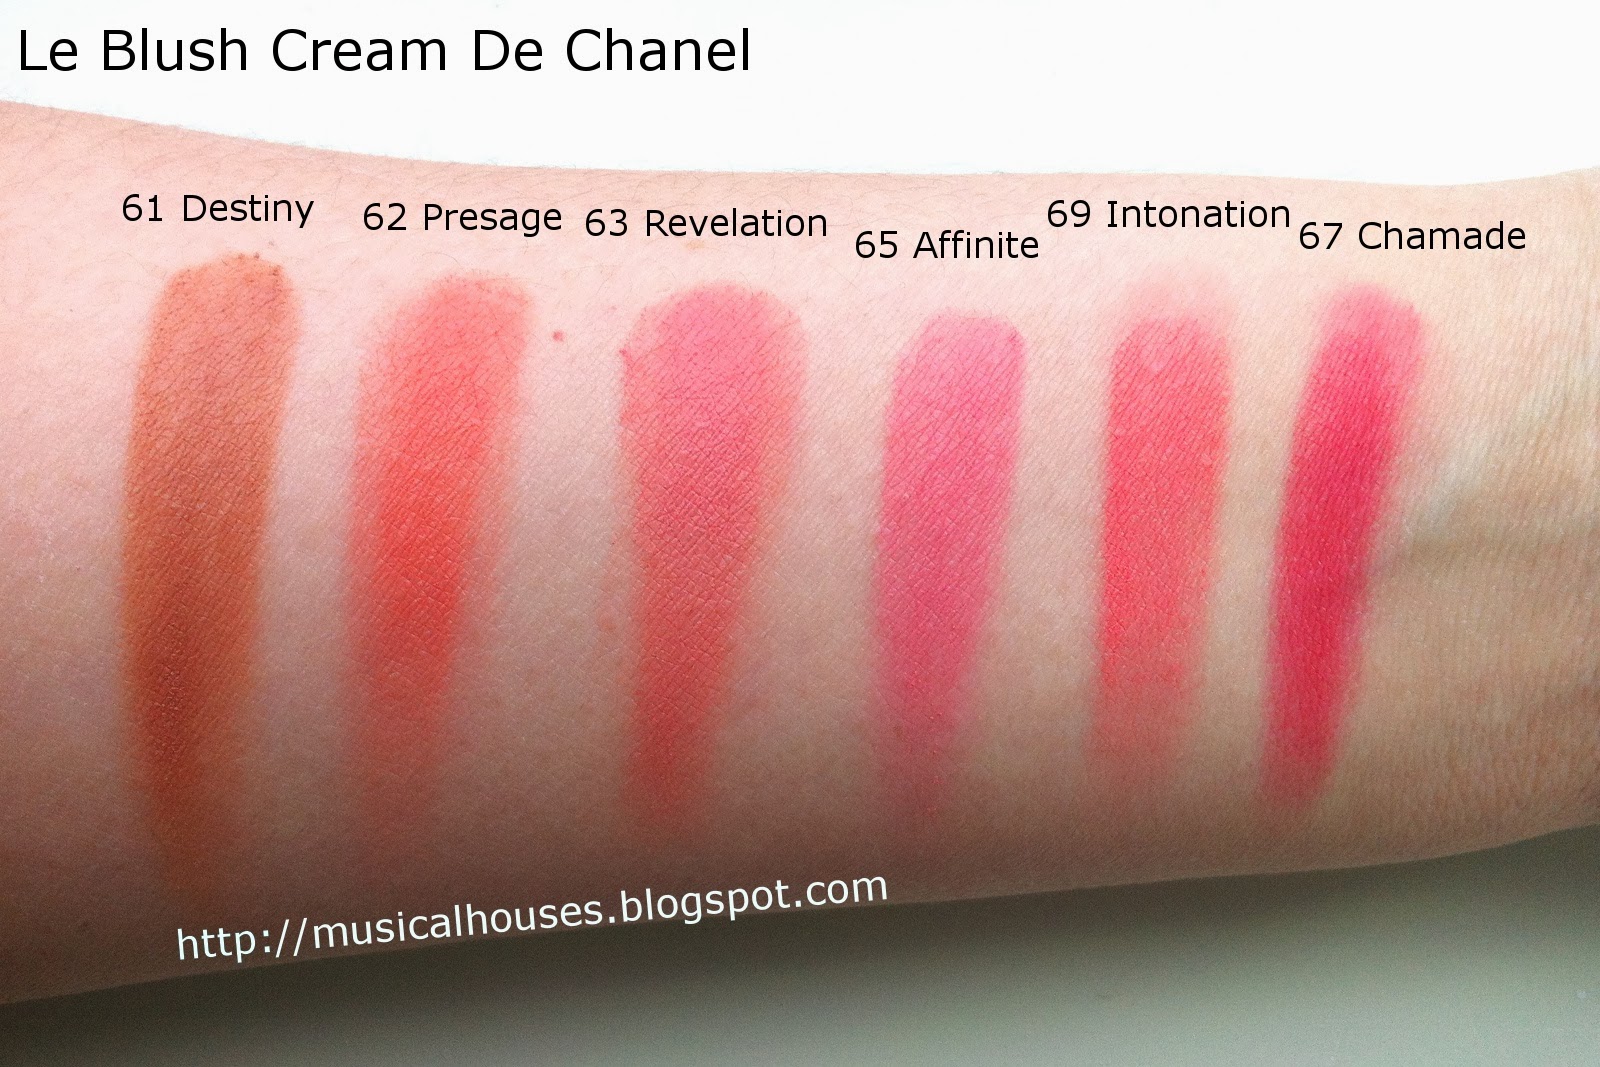 Chanel Swatches!  The Adorned Claw